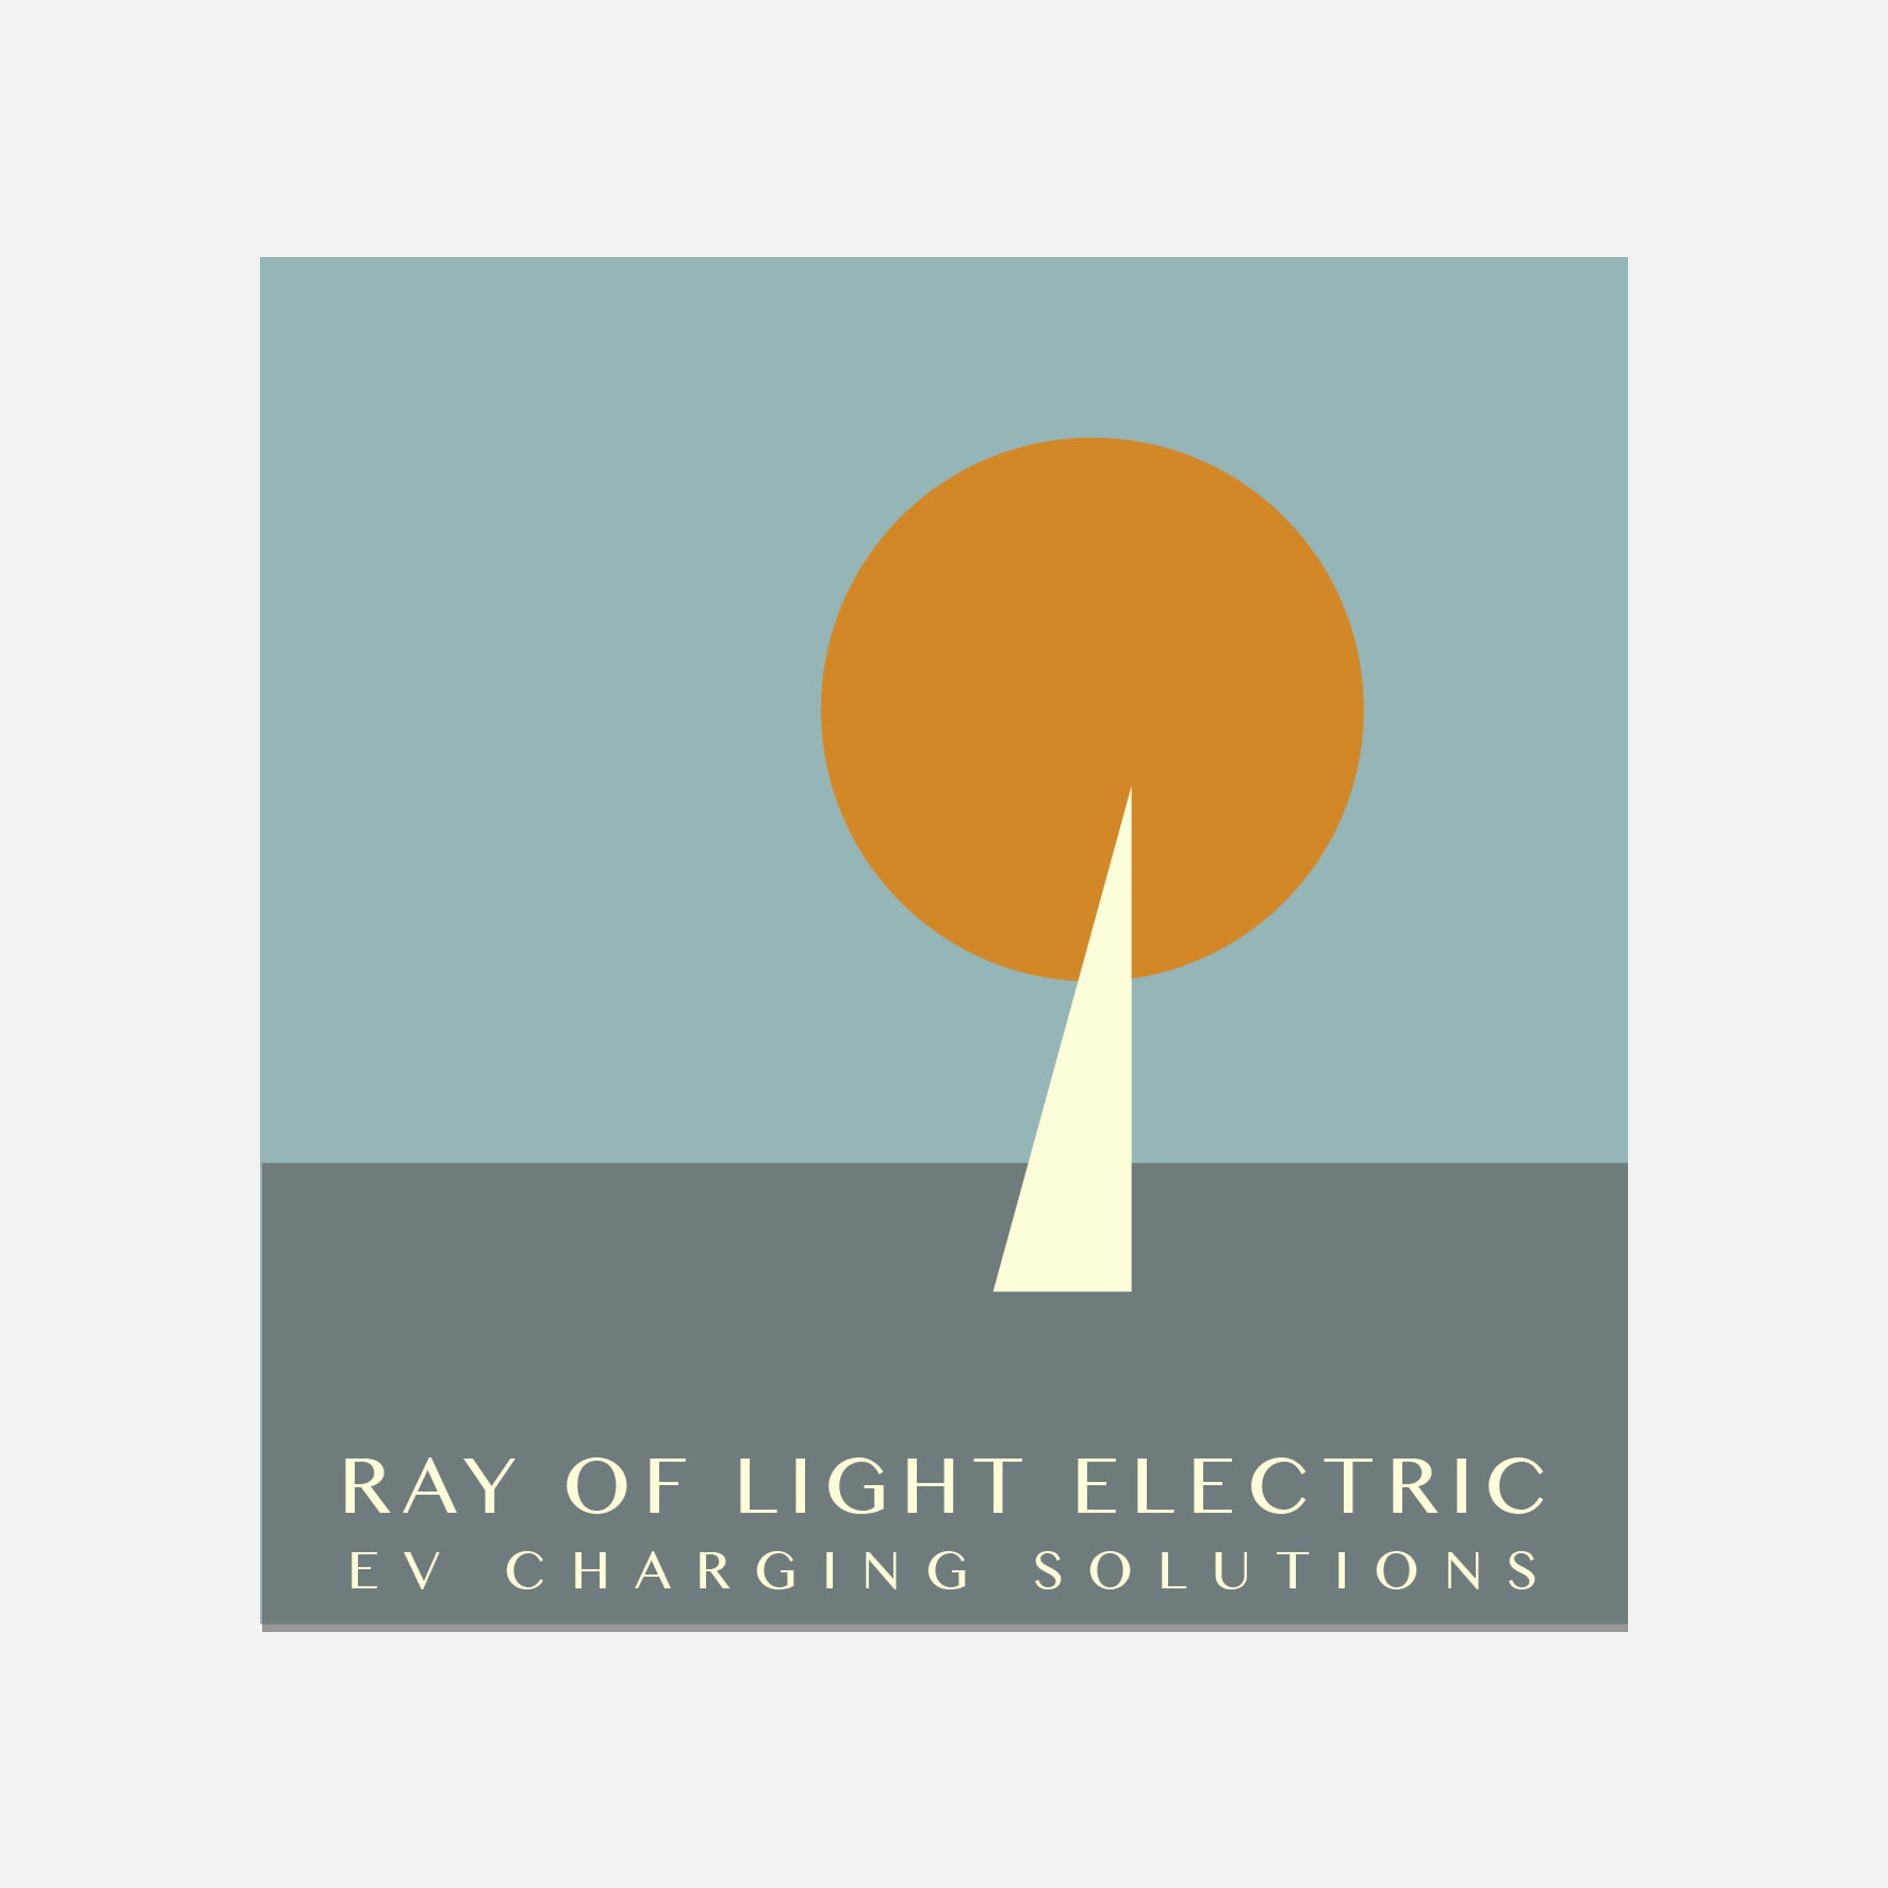 Ray of Light Electric EV Charging